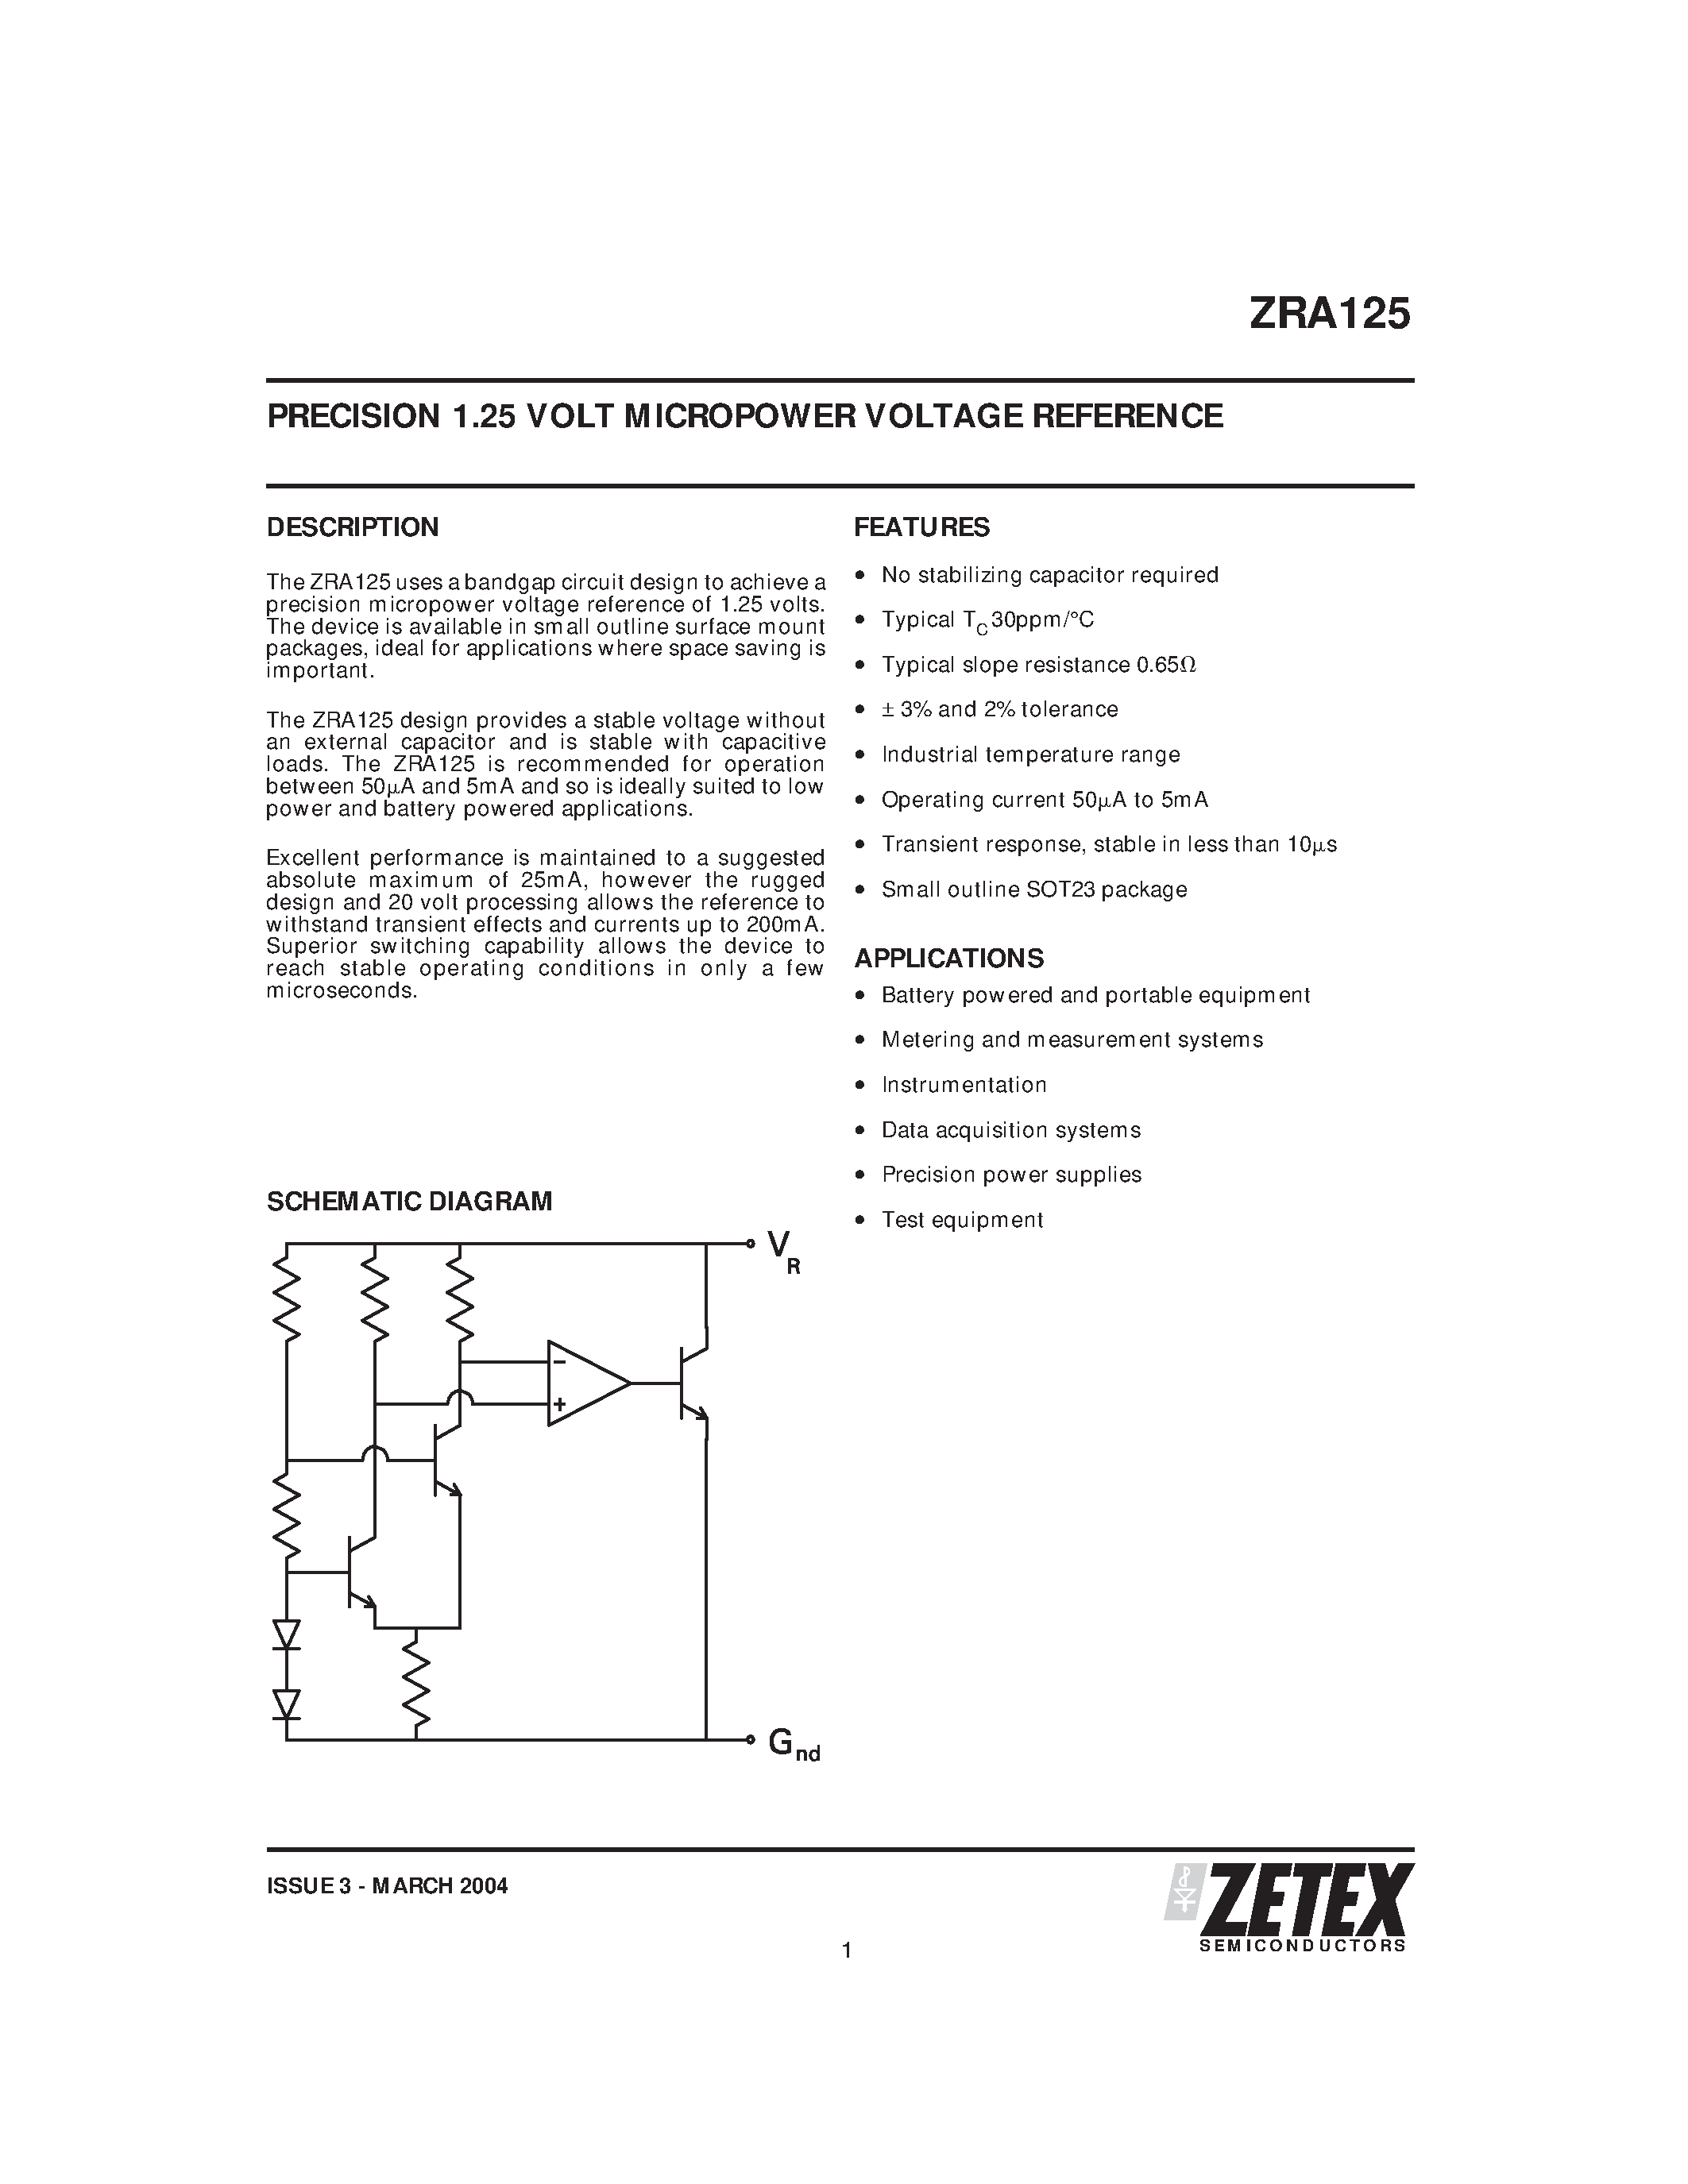 Datasheet ZRA125F02TA - PRECISION 1.25 VOLT MICROPOWER VOLTAGE REFERENCE page 1